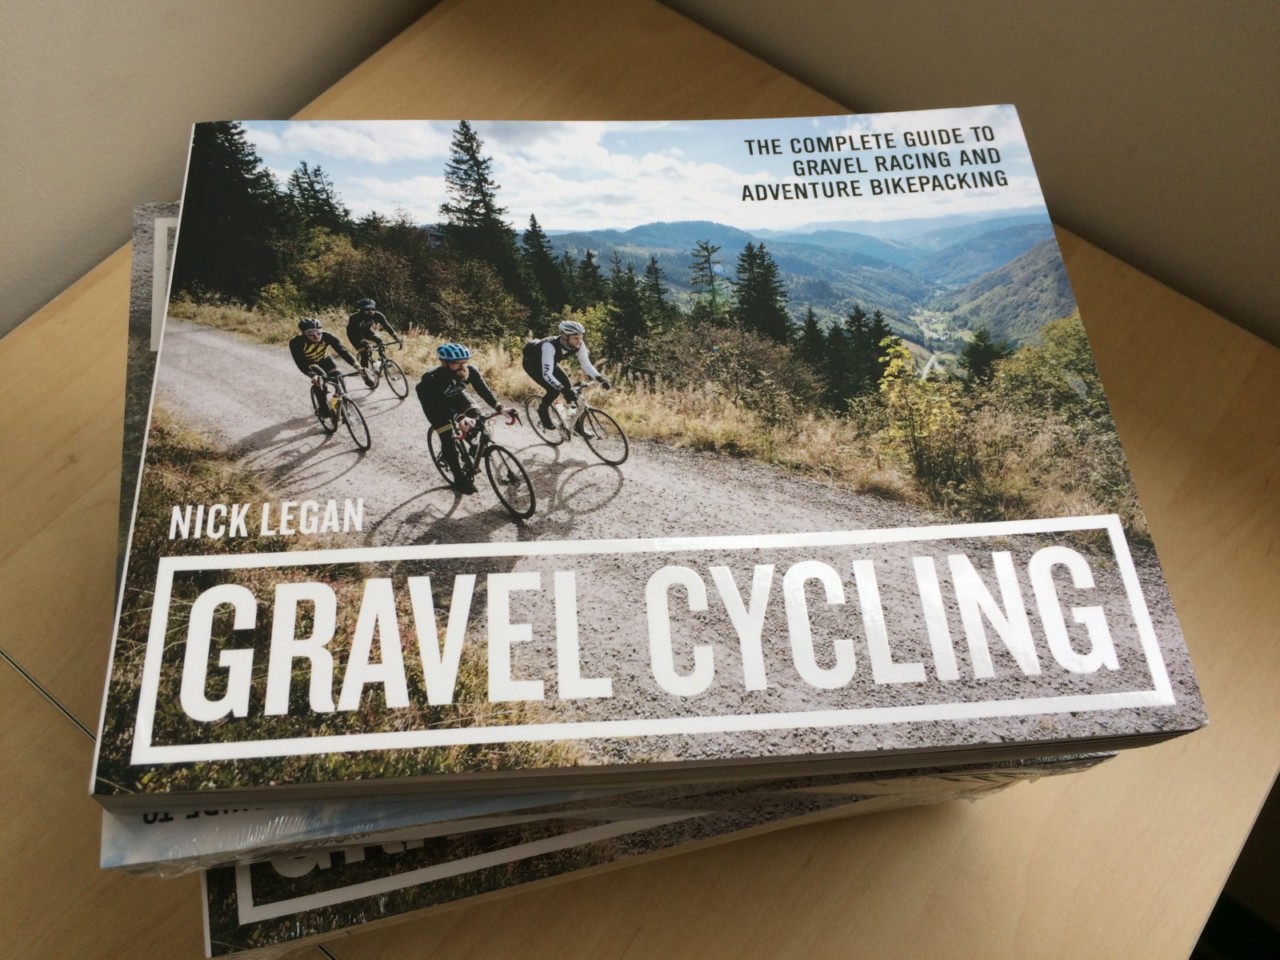 Nick Legan's book Gravel Cycling was a passion project for the cyclist and writer.